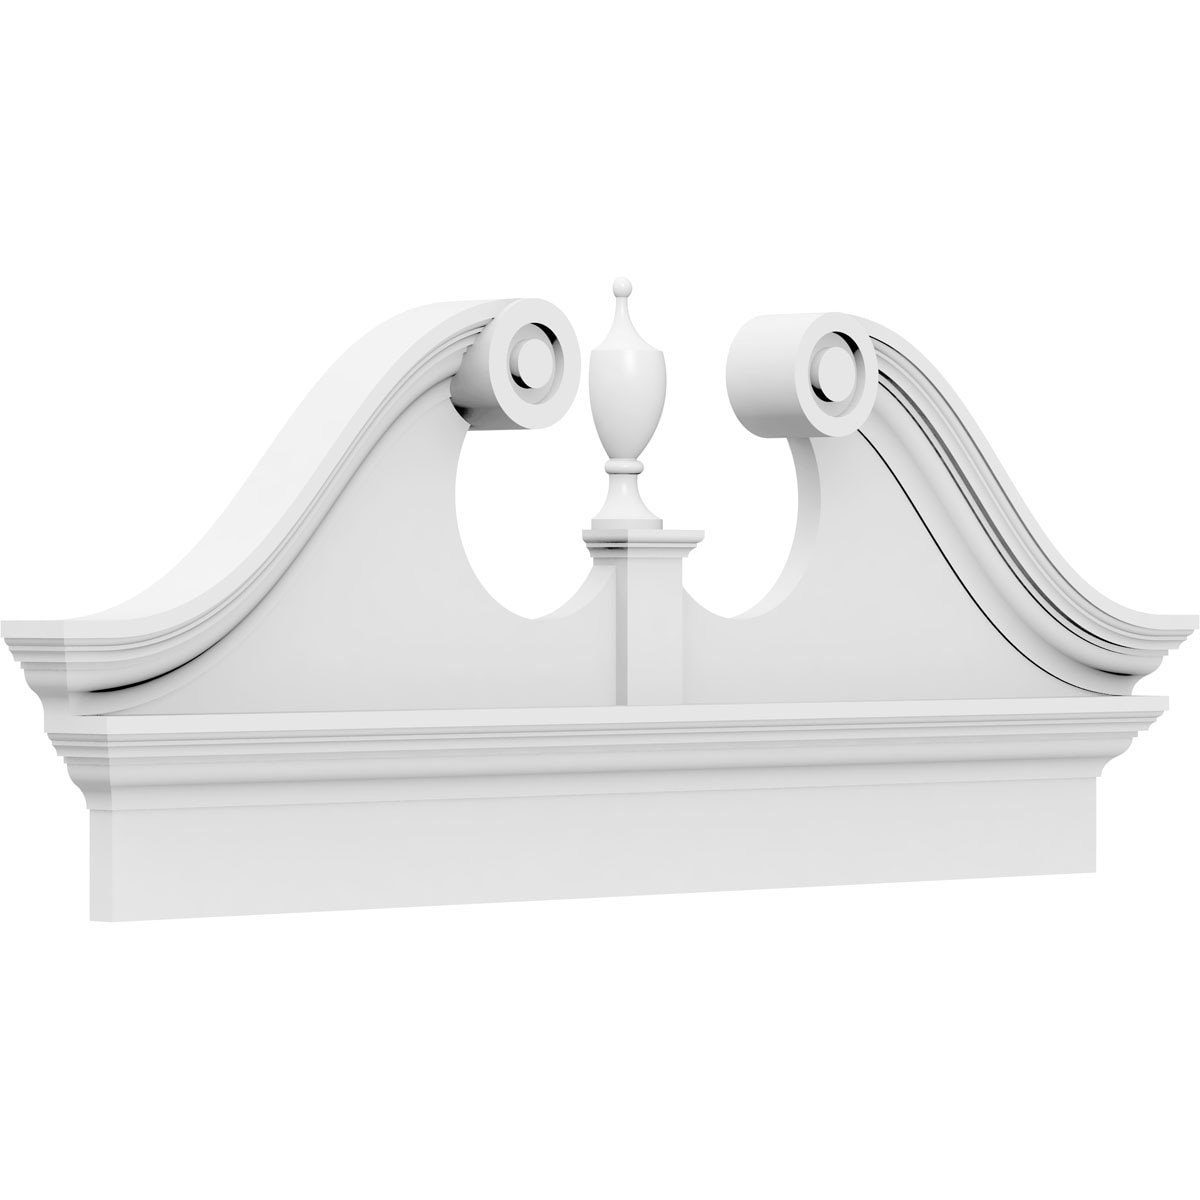 Ekena Millwork Rams Head 6-ft x 24-7/8-in Unfinished PVC Pediment Entry Door Casing Accent in White | PEDPC072X250RHP00